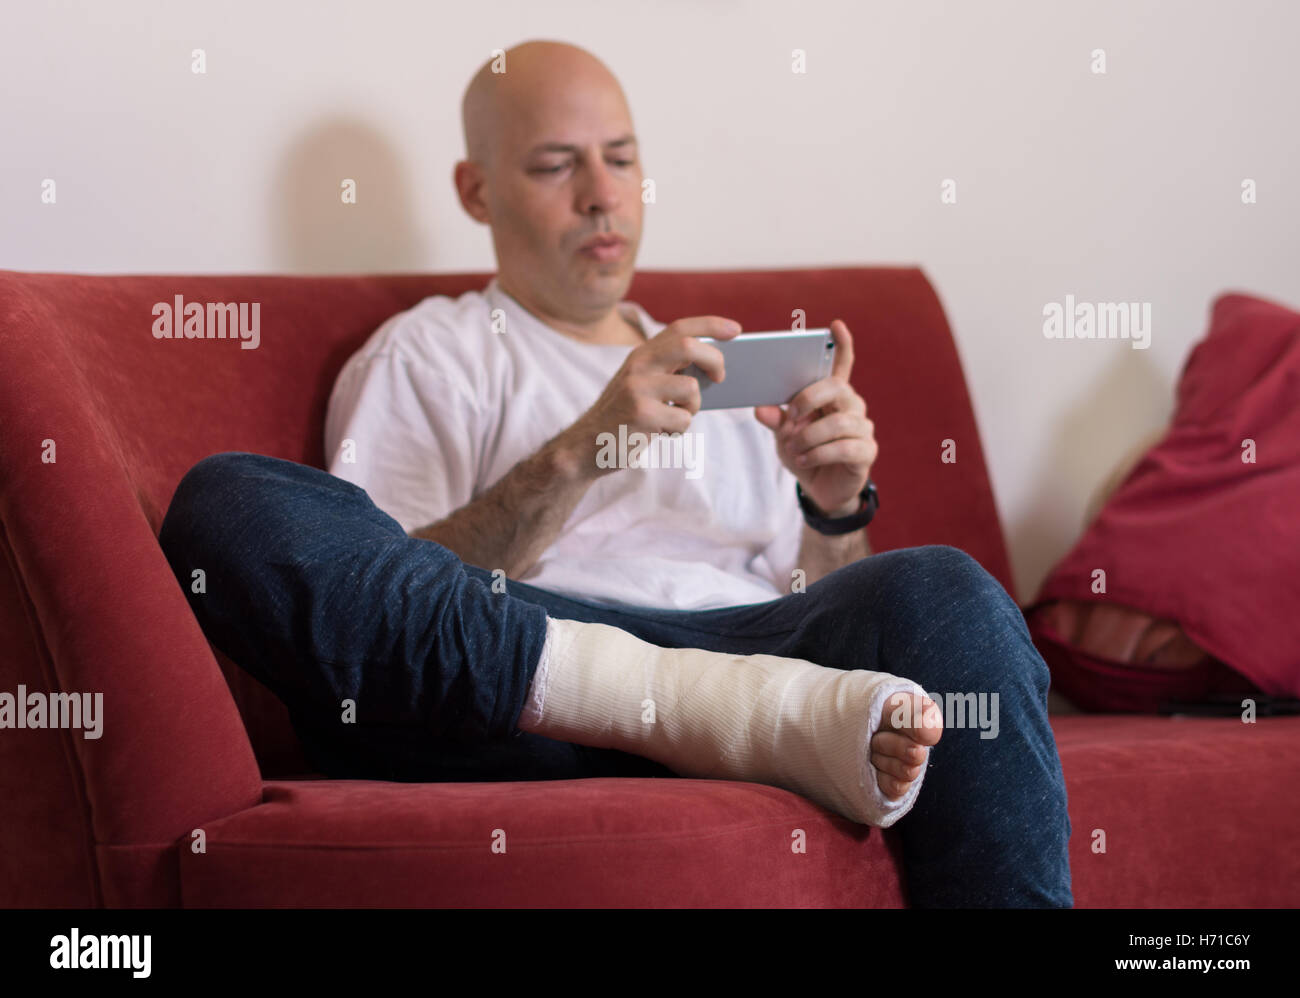 Young man with a broken ankle and a white cast on his leg, sitting on a red couch, surfing the web on his phone (selective focus Stock Photo